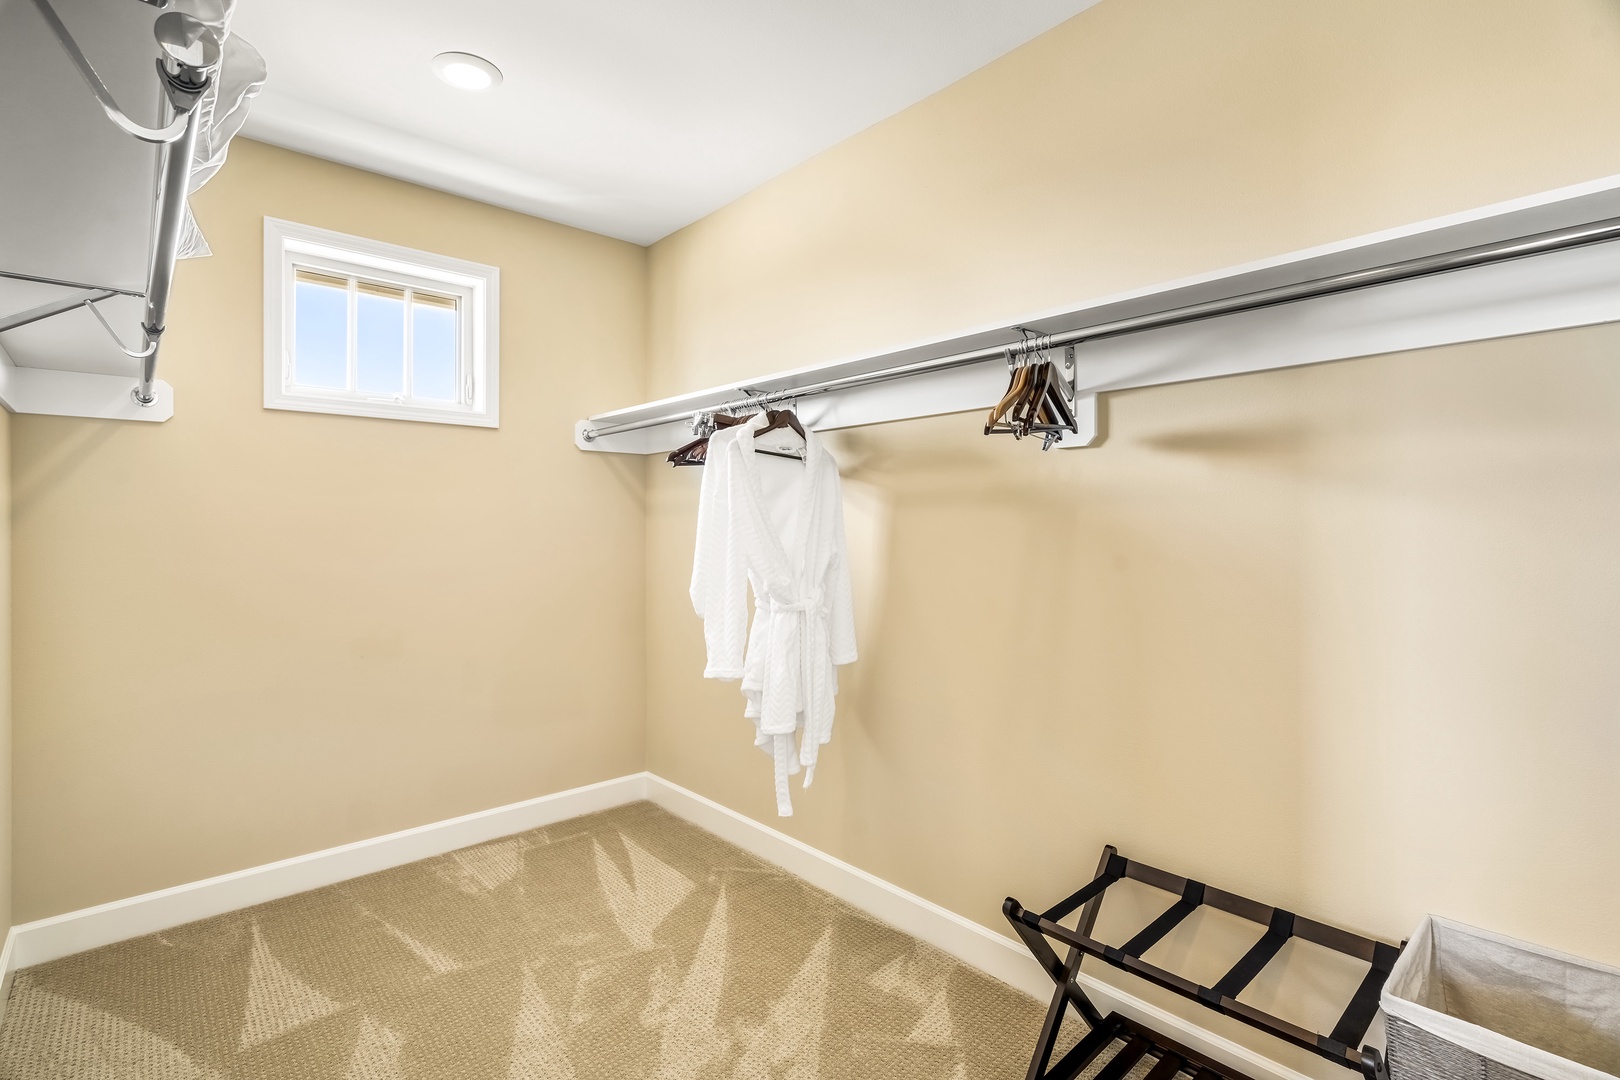 Kailua Kona Vacation Rentals, Green/Blue Combo - Primary bedroom closet with robes!